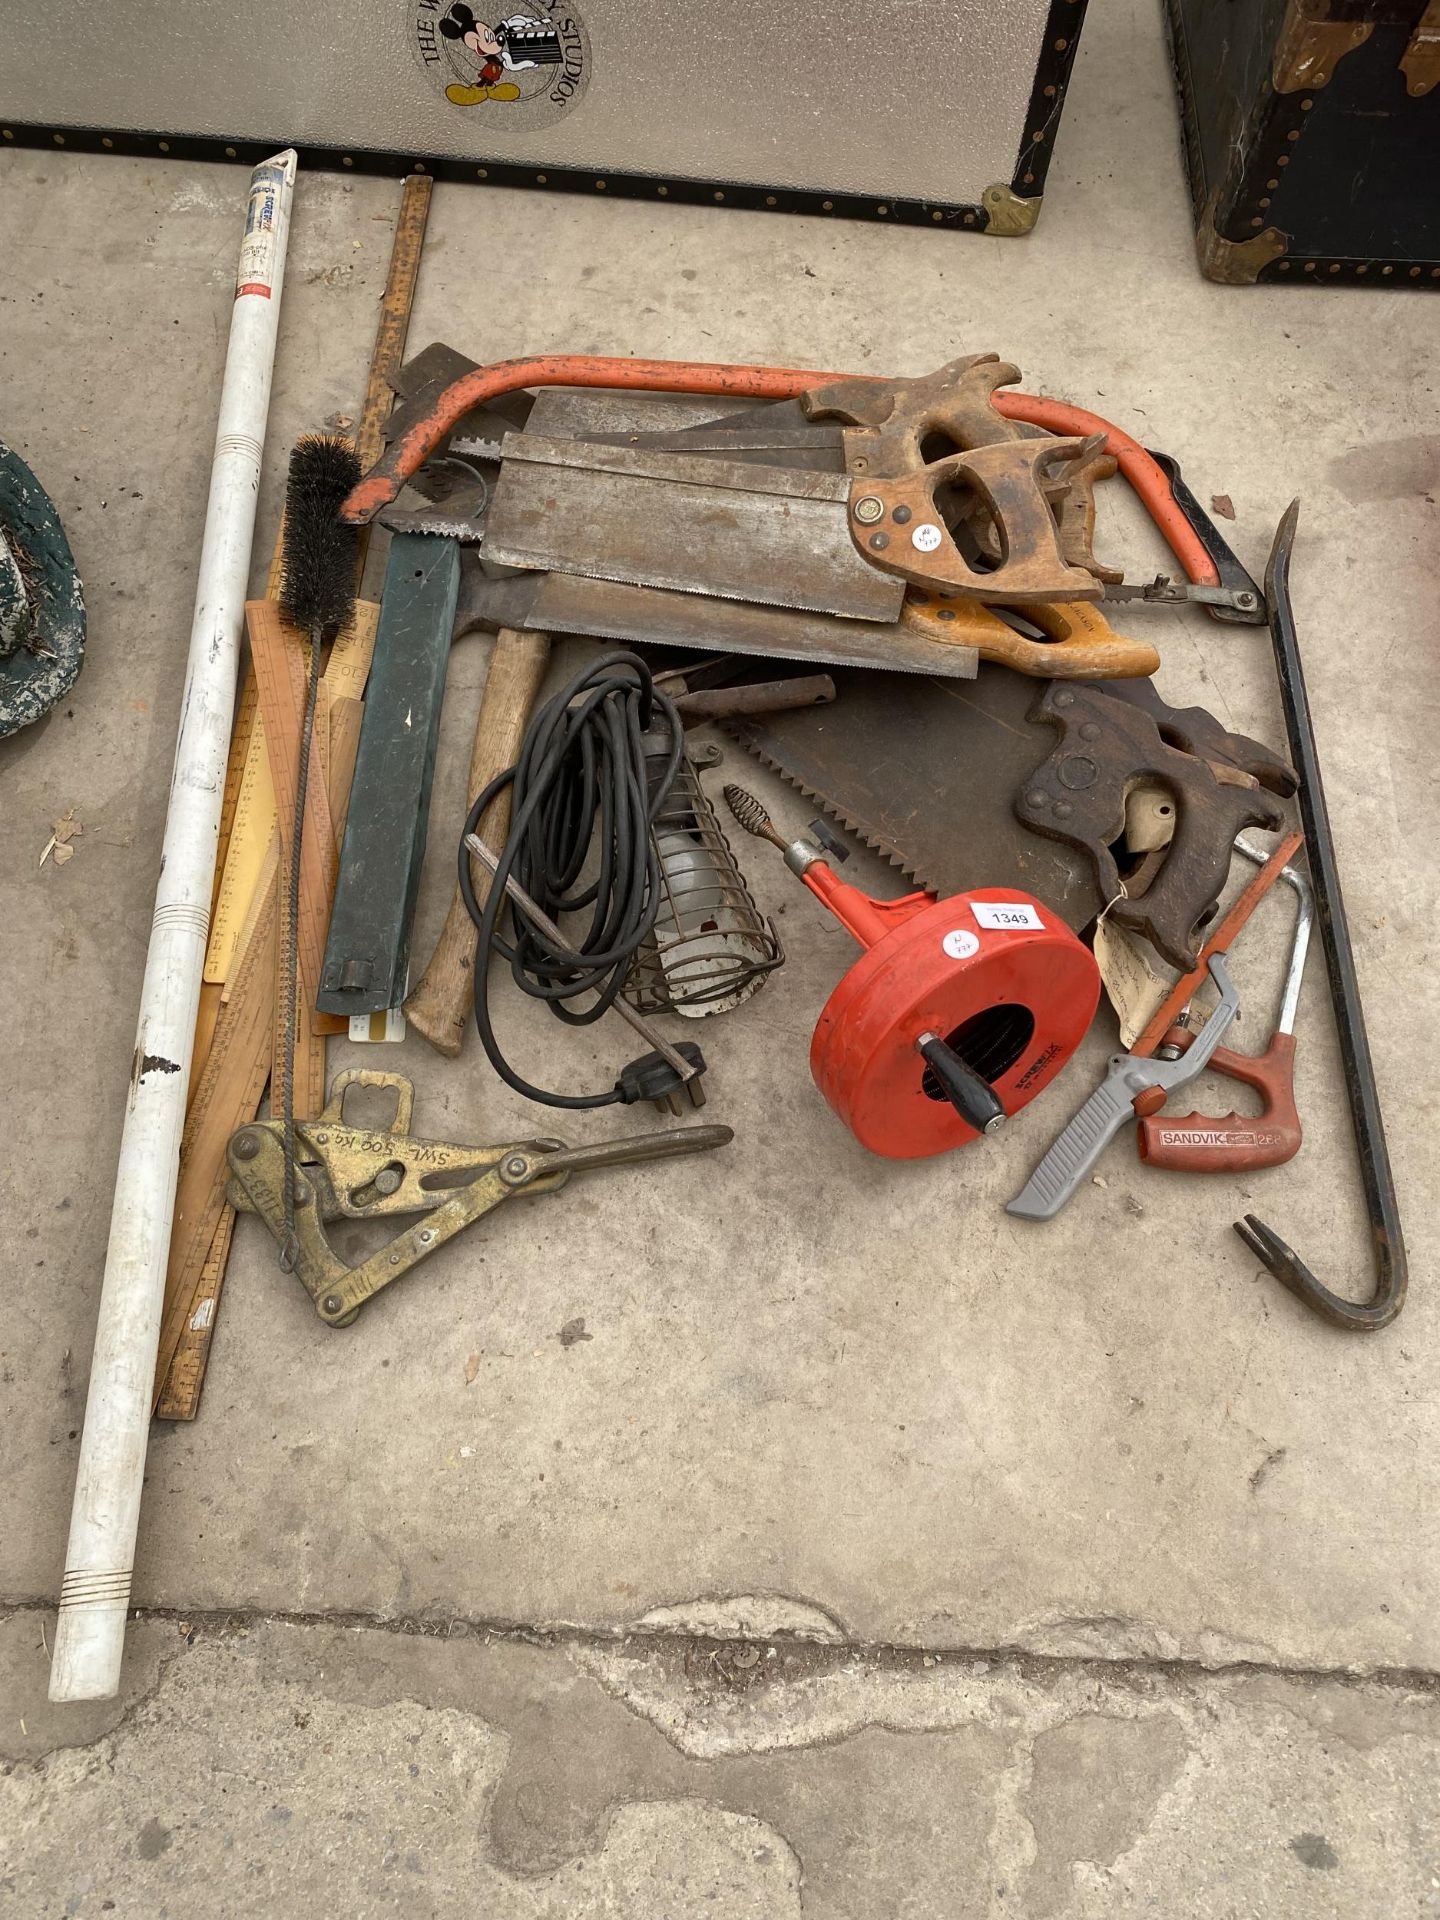 AN ASSORTMENT OF VINTAGE TOOLS TO INCLUDE SAWS, AN AXE AND A 12MM X 1000MM SDS DRILL BIT ETC